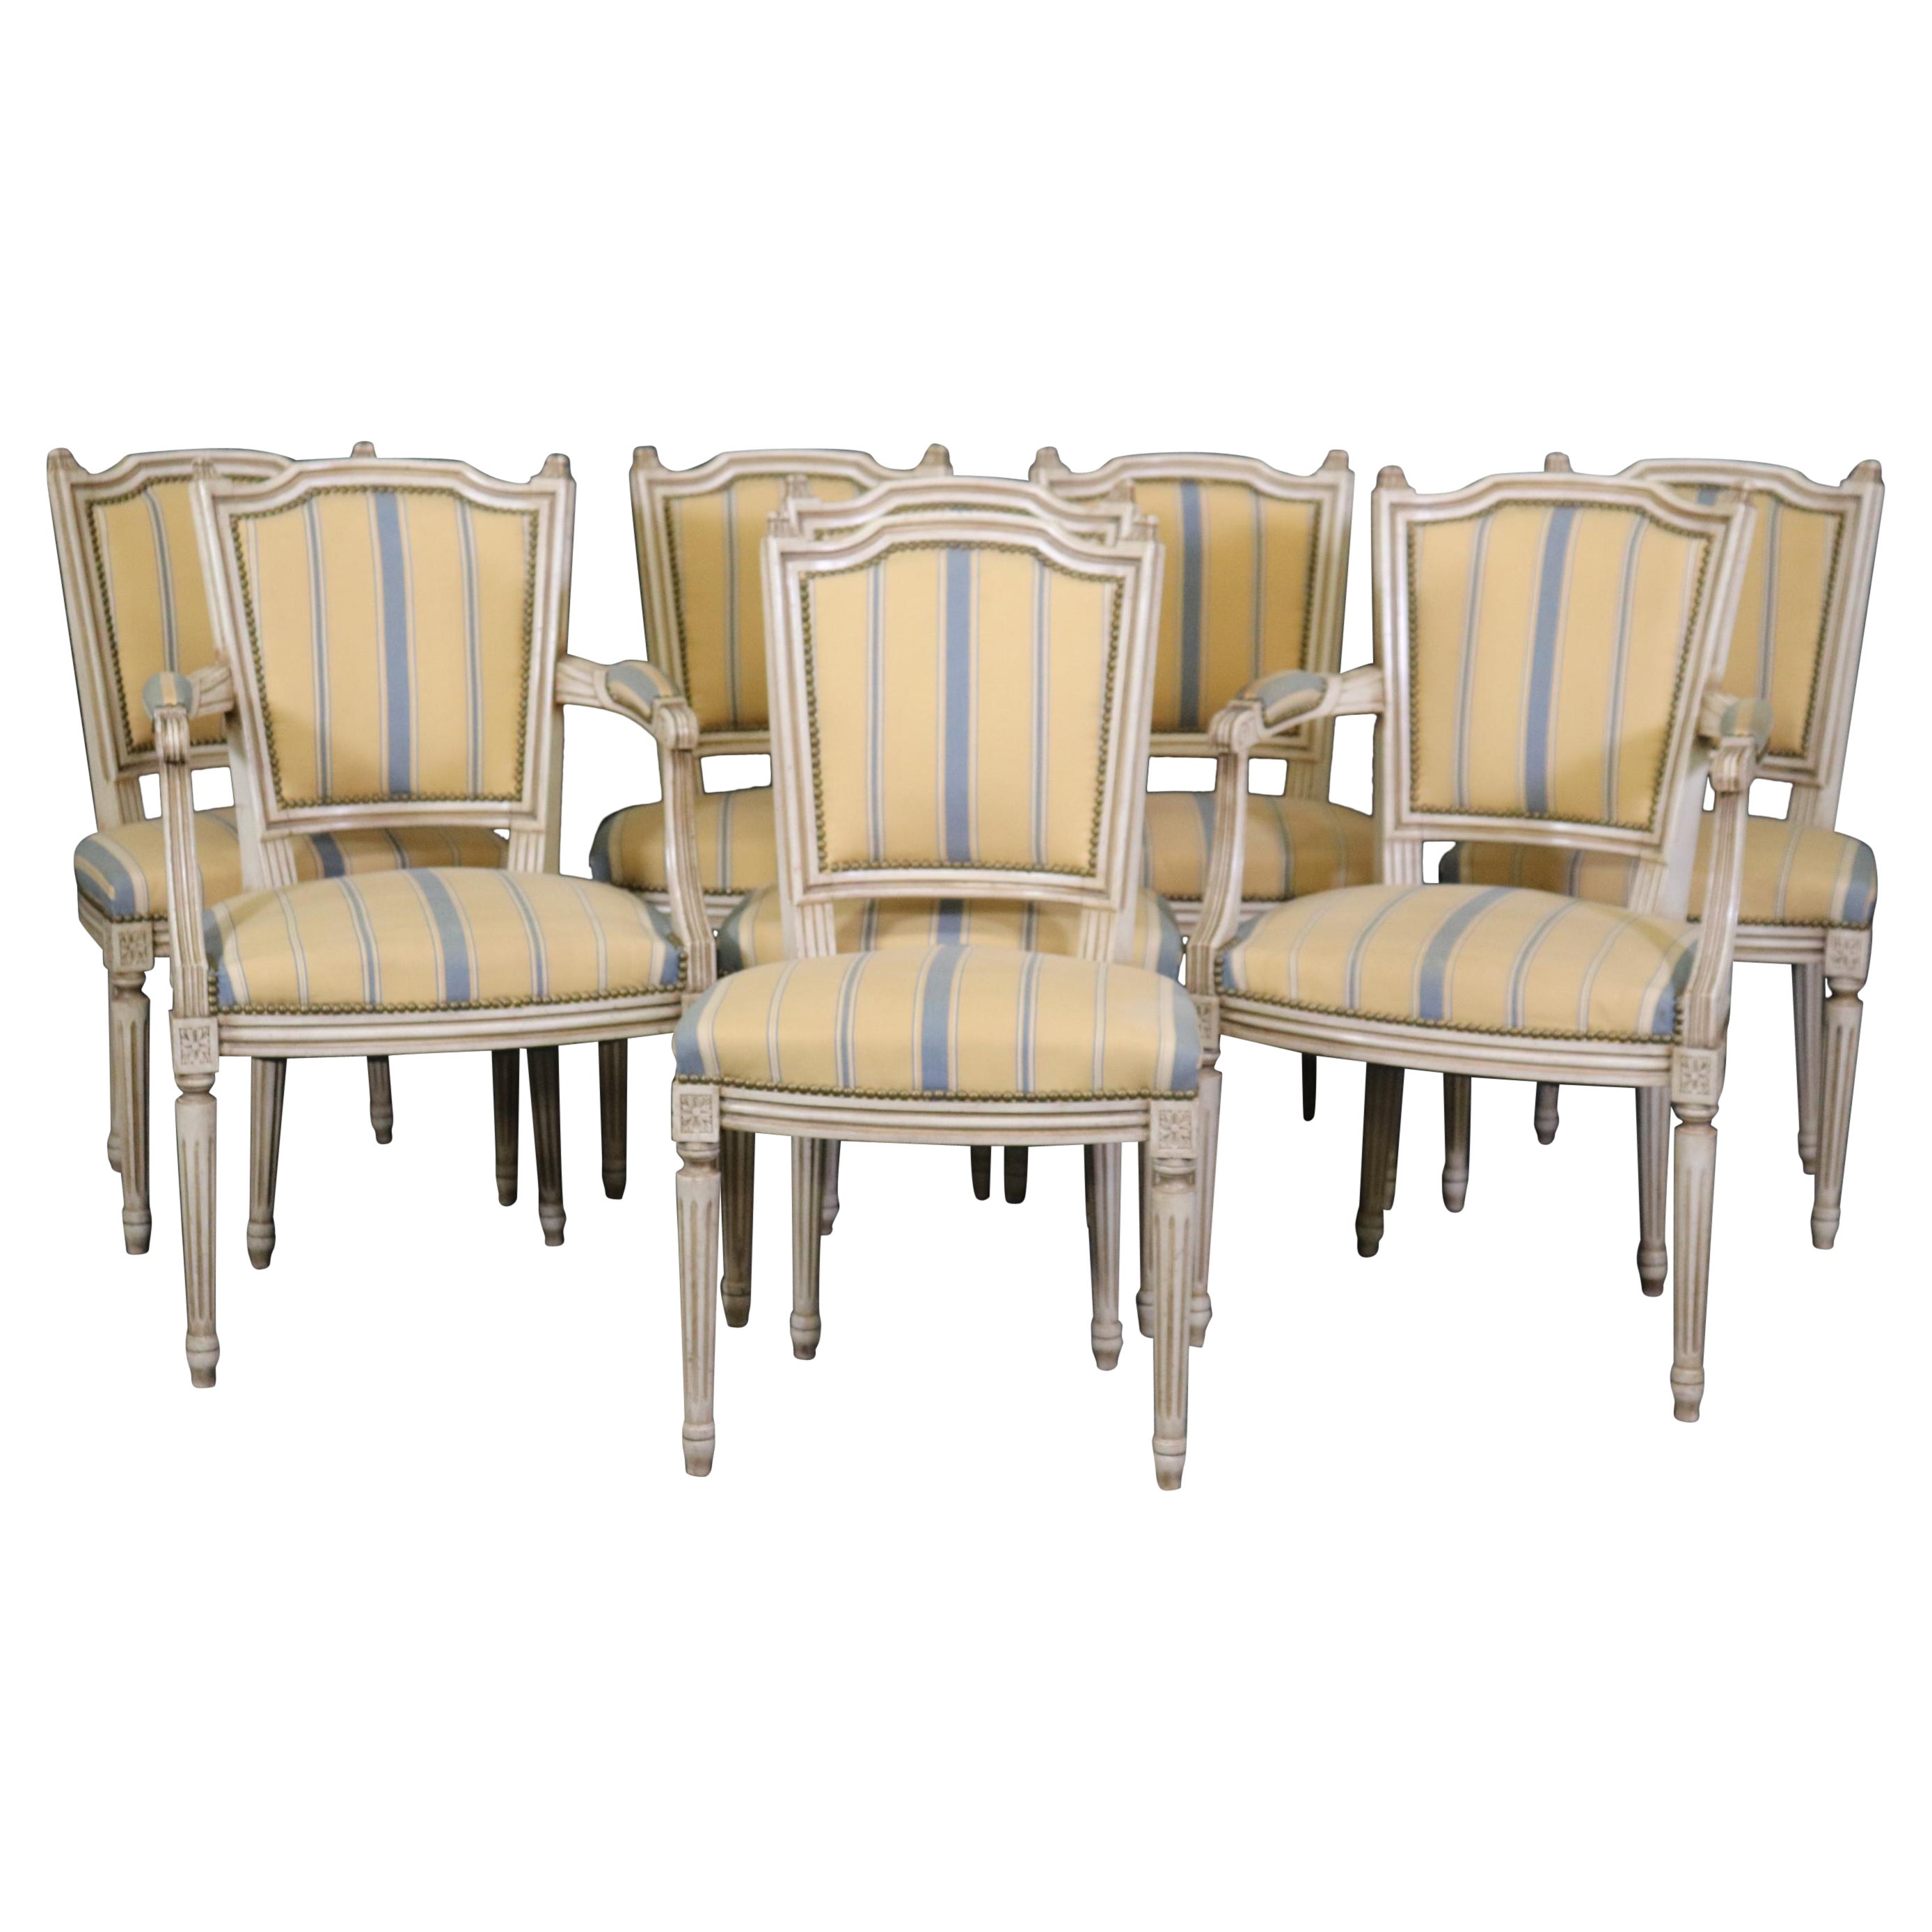 A Set of 8 French Louis XVI-Style Painted Square Back Dining Chairs, c. 1940